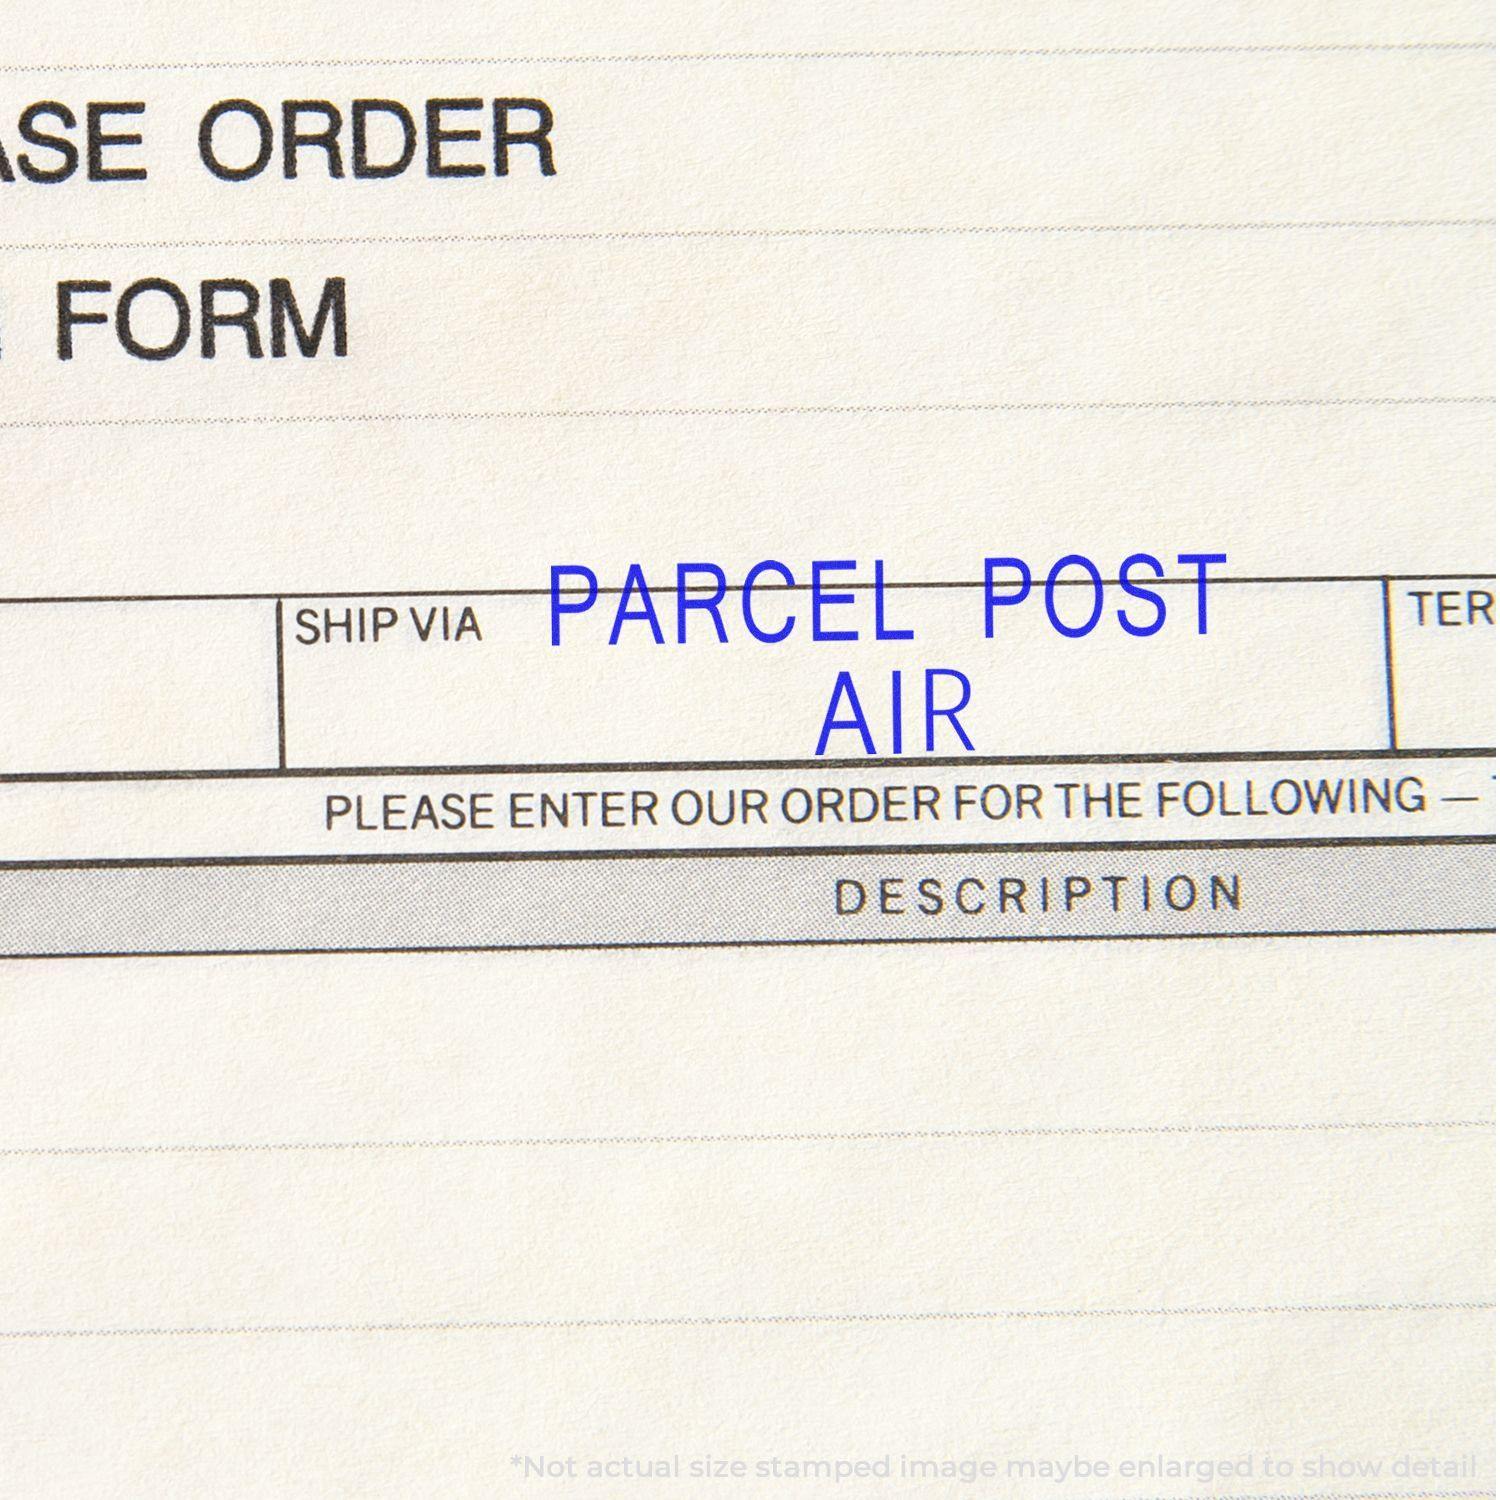 A stock office rubber stamp with a stamped image showing how the text "PARCEL POST AIR" is displayed after stamping.